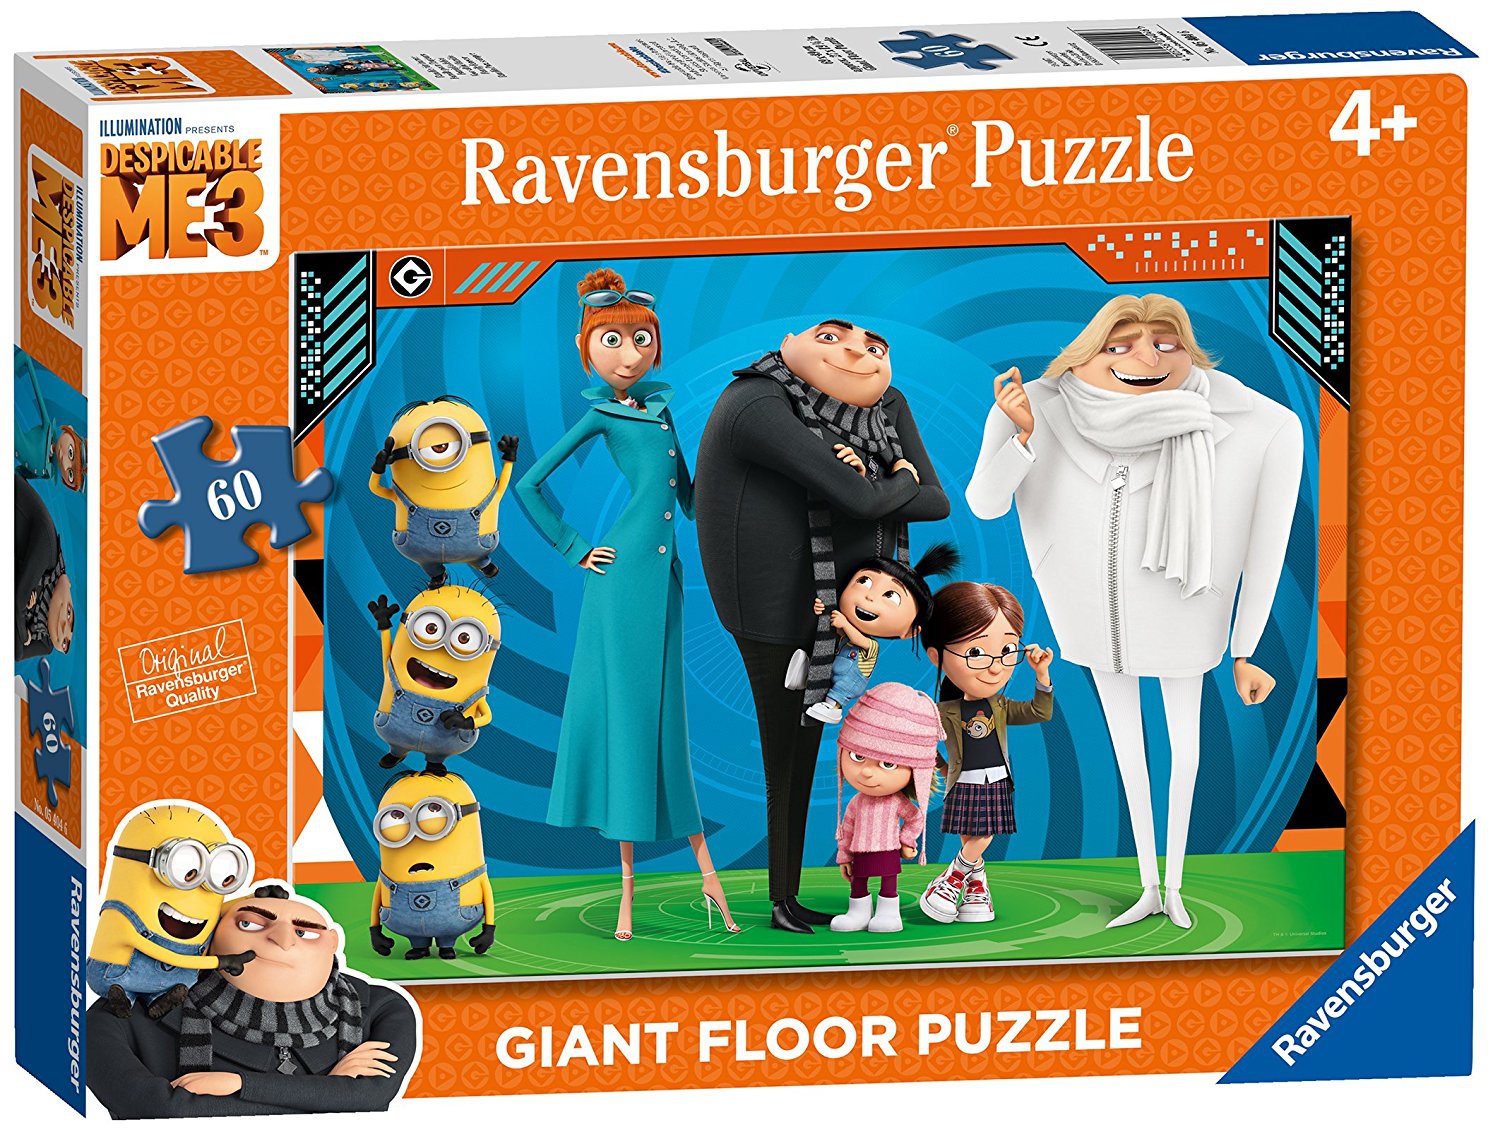 Despicable Me 3 'Minions' Giant Floor 60 Piece Jigsaw Puzzle Game